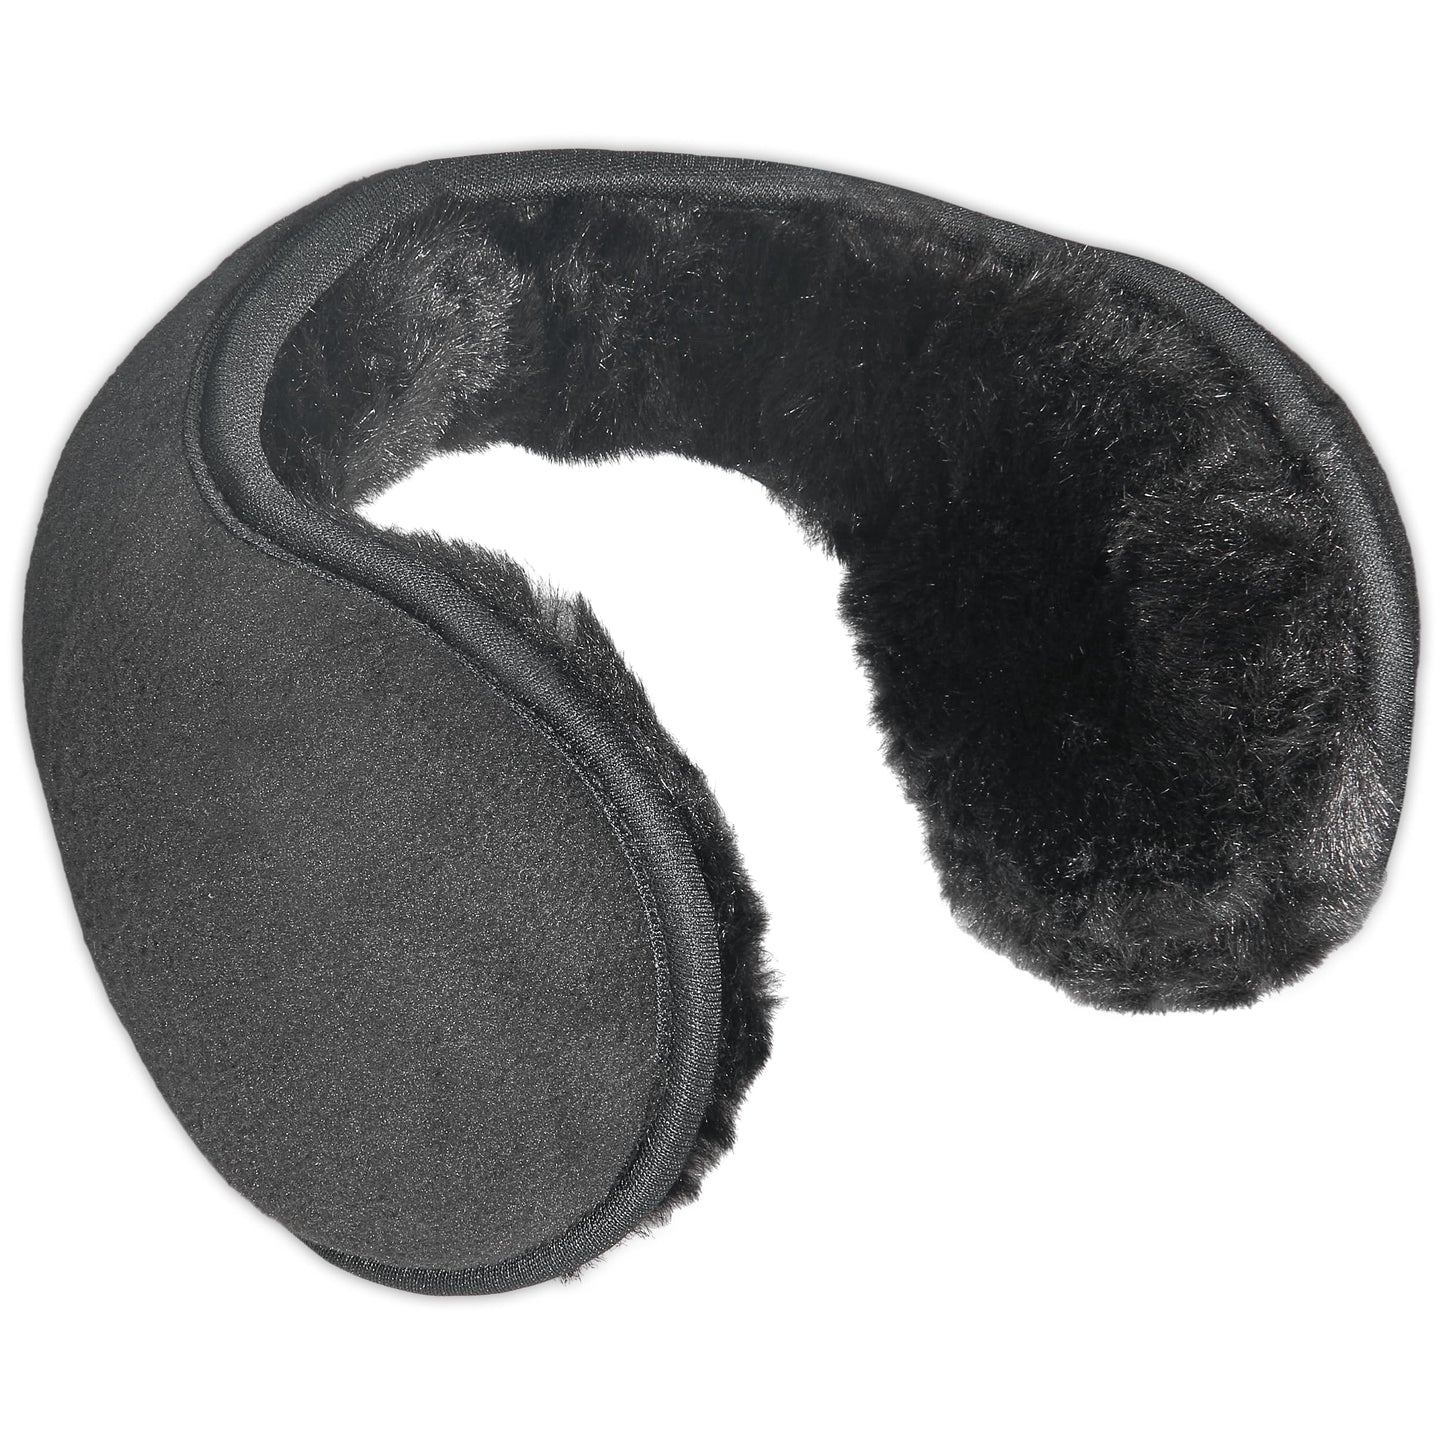 LUTHER PIKE SEATTLE Ear Muffs for Winter - Women & Men's Behind-the-Head Warmers﻿